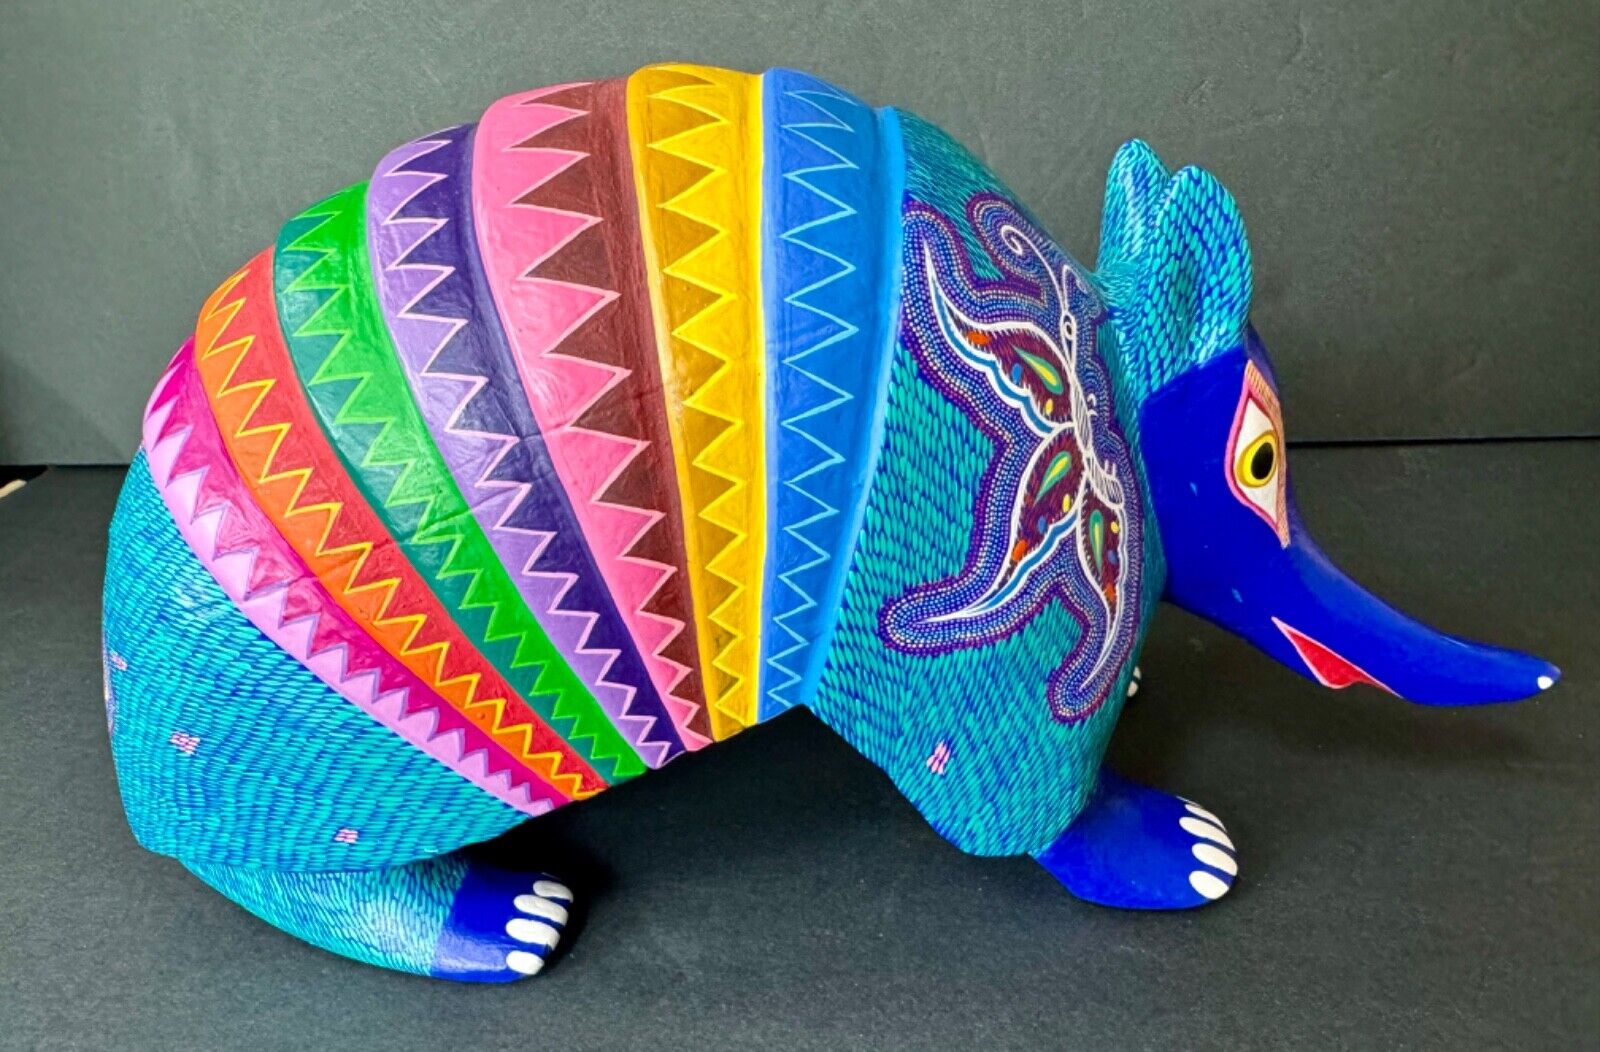 Exquisite Hand-Carved Wooden Armadillo by Azucena Santiago Arrazola 12\